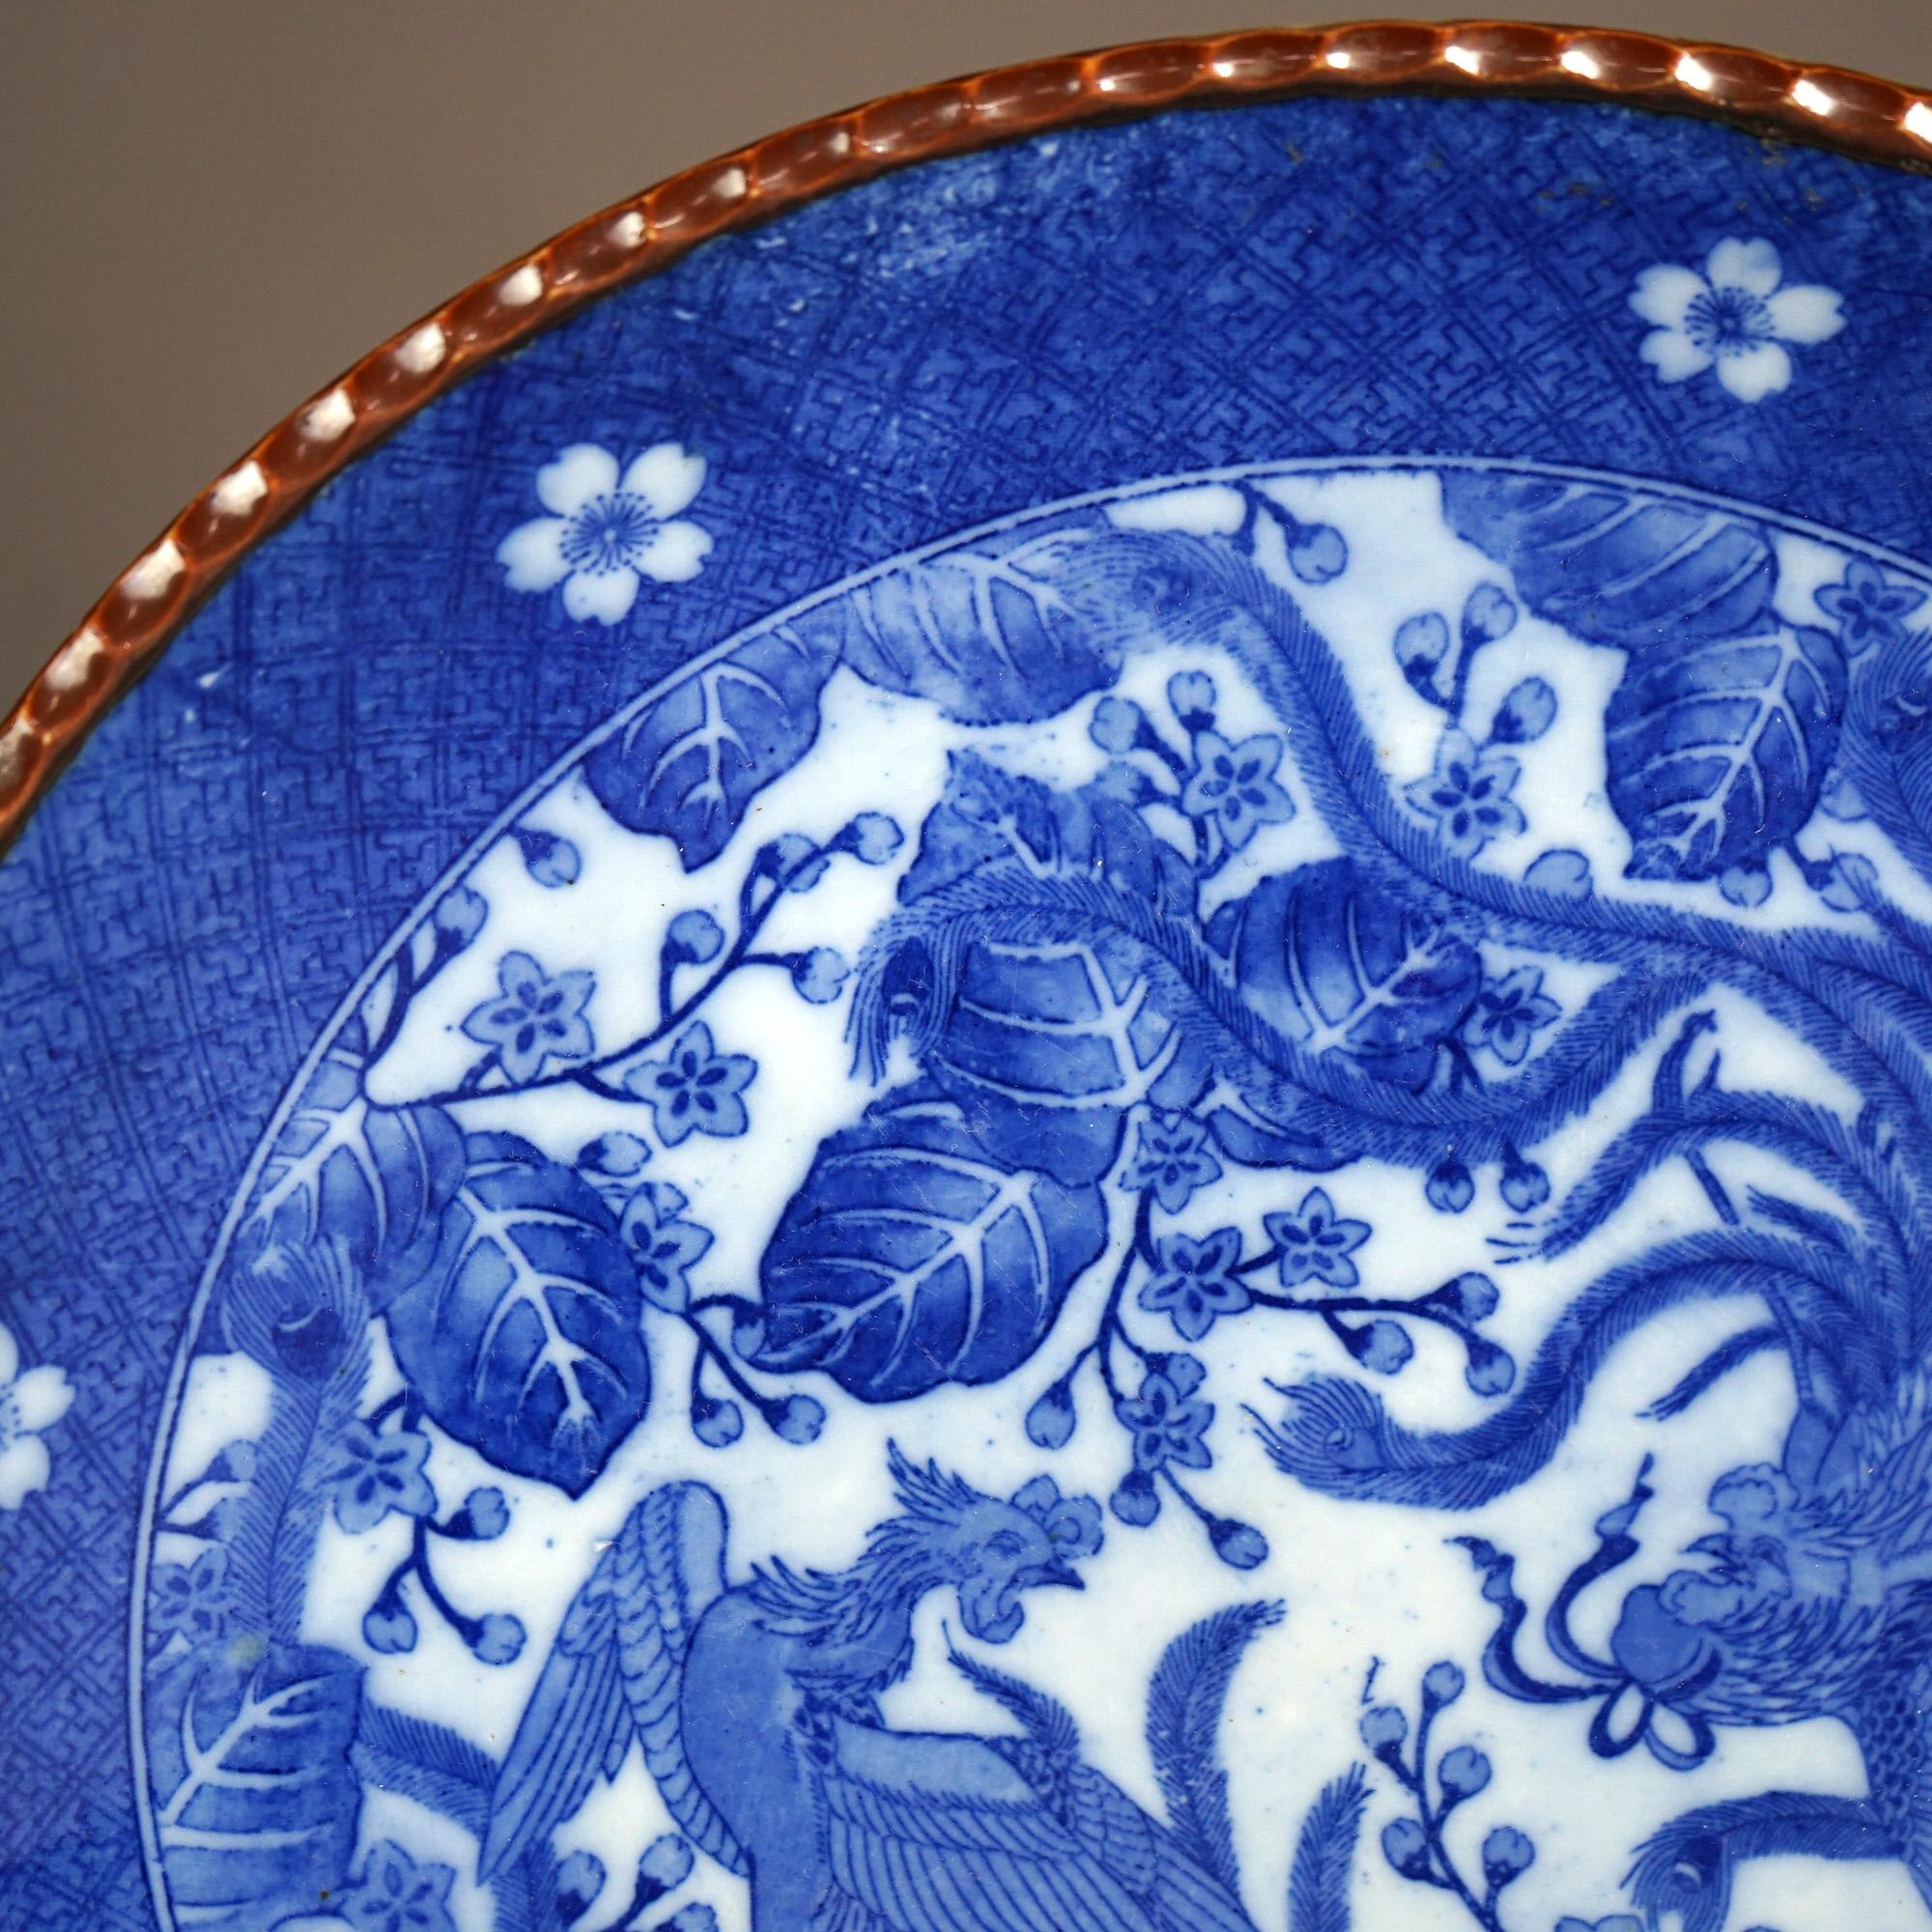 20th Century Antique Imari Meiji Blue & White Porcelain Charger with Birds Circa 1910 For Sale